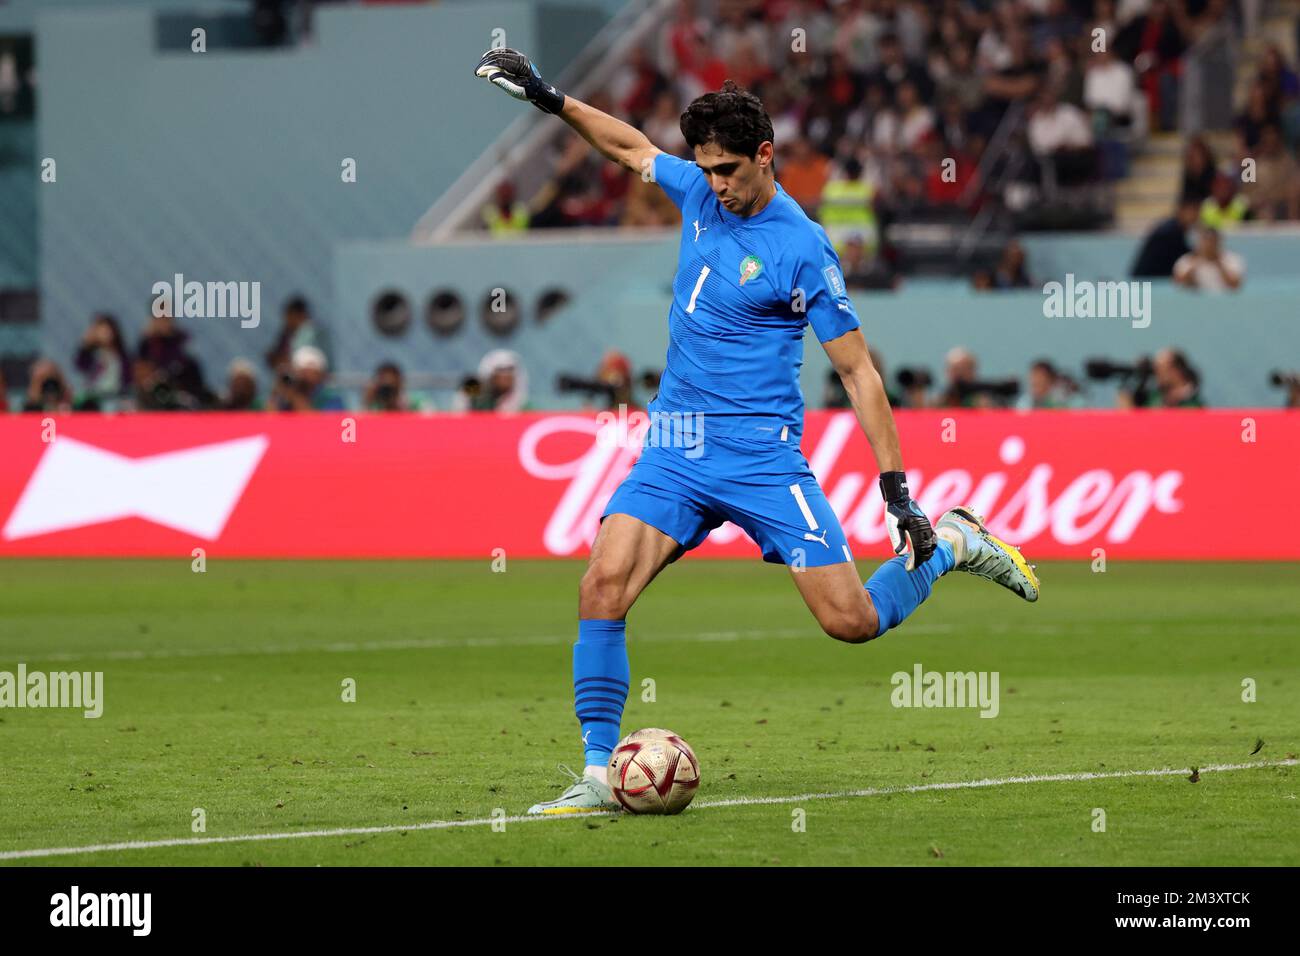 DOHA, QATAR - DECEMBER 17: Goalkeeper Yassine Bounou of Morocco in action during the FIFA World Cup Qatar 2022 3rd Place match between Croatia and Morocco at Khalifa International Stadium on December 17, 2022 in Doha, Qatar. Photo: Goran Stanzl/PIXSELL Credit: Pixsell/Alamy Live News Stock Photo